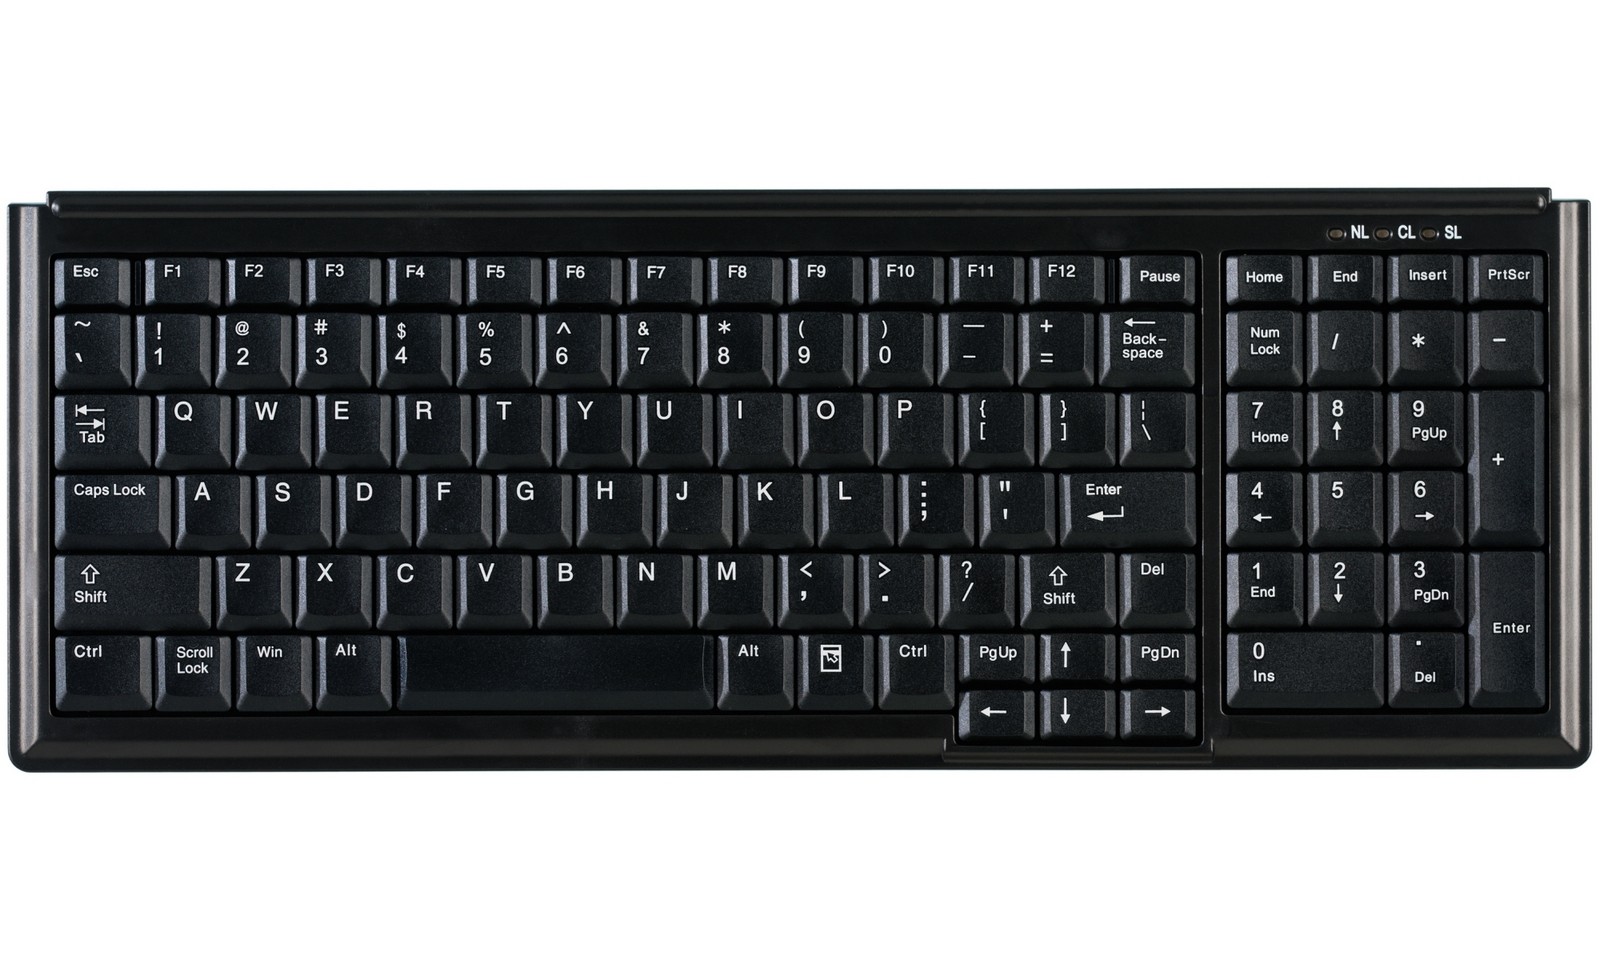 104 Key Notebook Style Keyboard with Numeric Pad, USB, black, Swiss layout